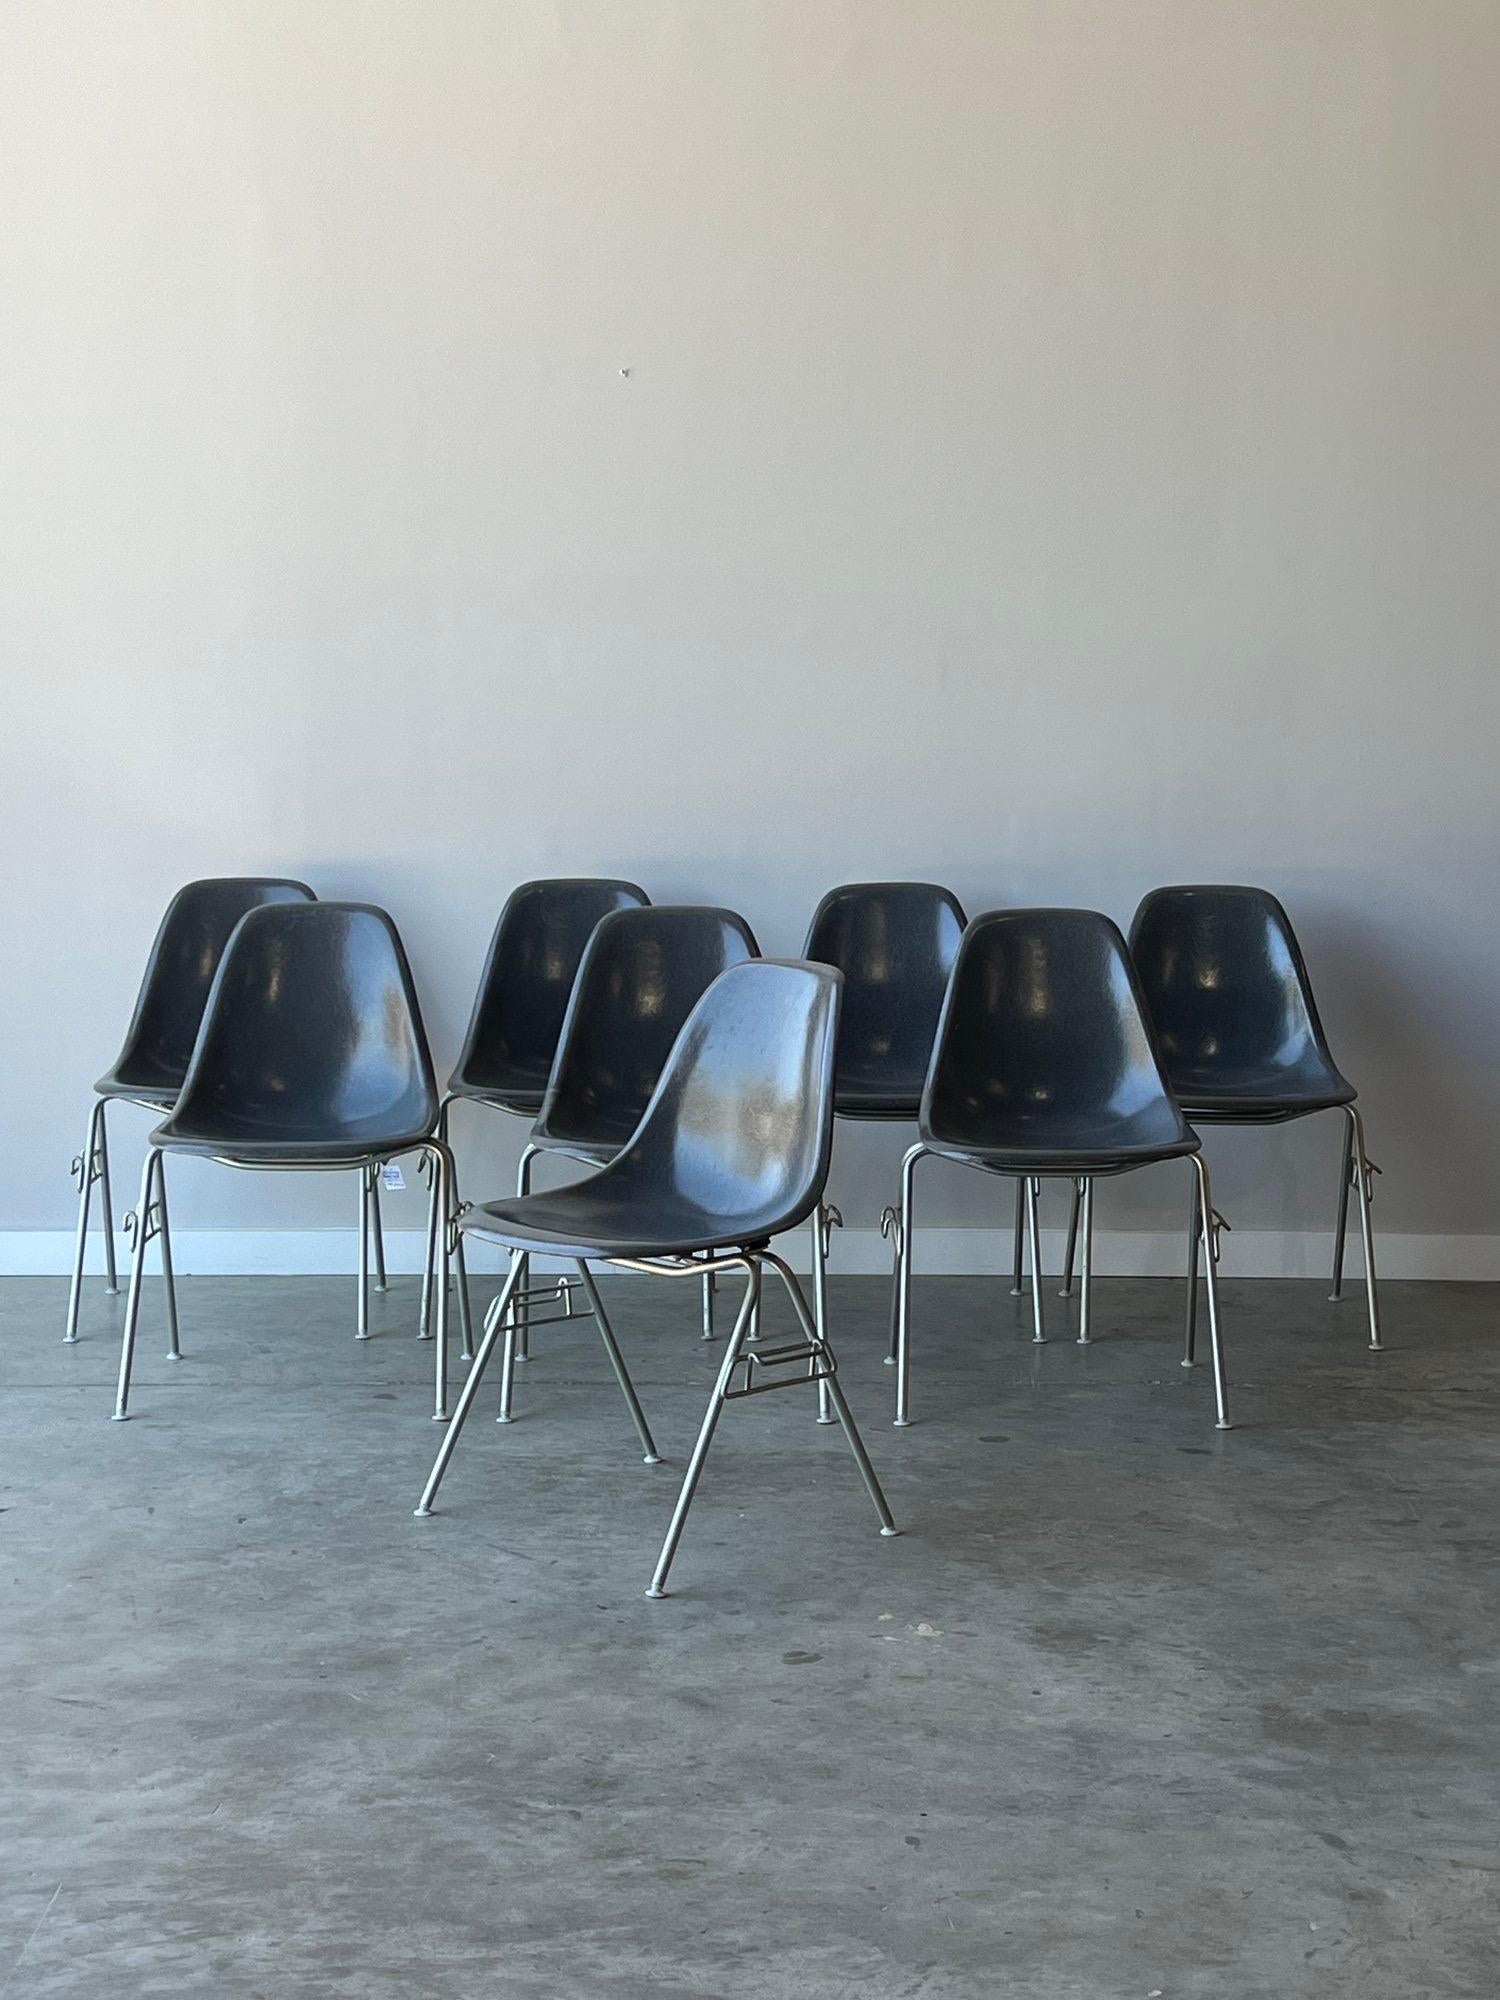 Pleased to offer a great collection of 8 Mid Century Modern Herman Miller Eames DSS stacking chairs in elephant hide grey. These chairs are in fantastic vintage condition with no chips or cracks. Minor patina from age not very noticeable through the